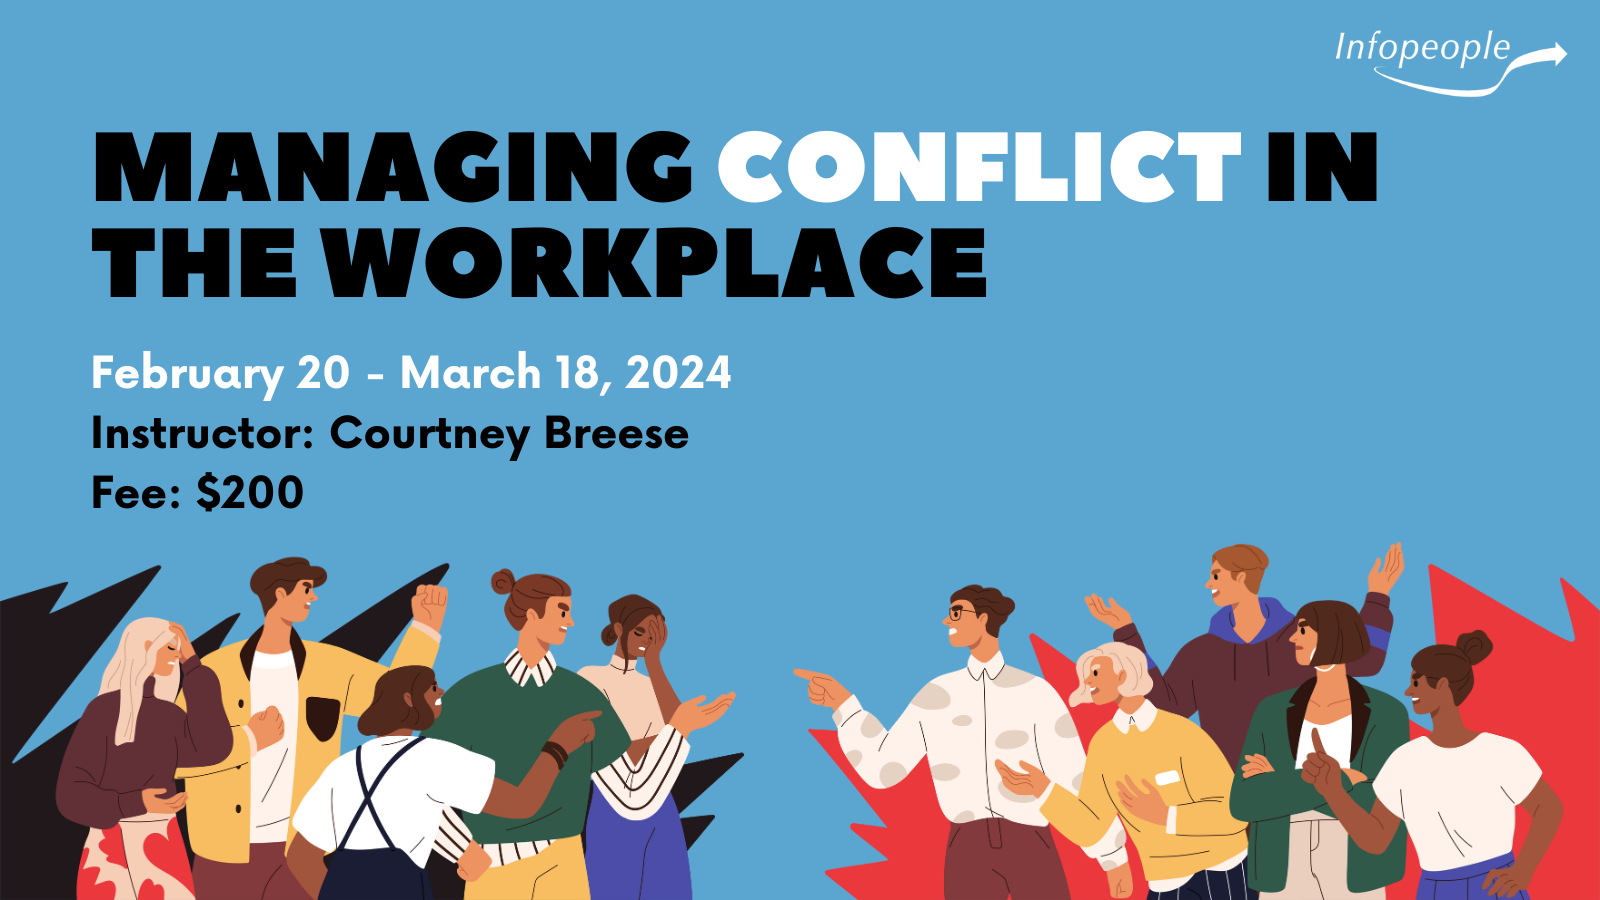 Managing Conflict in the Workplace - an Infopeople course. February 20 to March 18, 2024. Instructor: Courtney Breese. Fee: $200. Two groups of five people arguing.